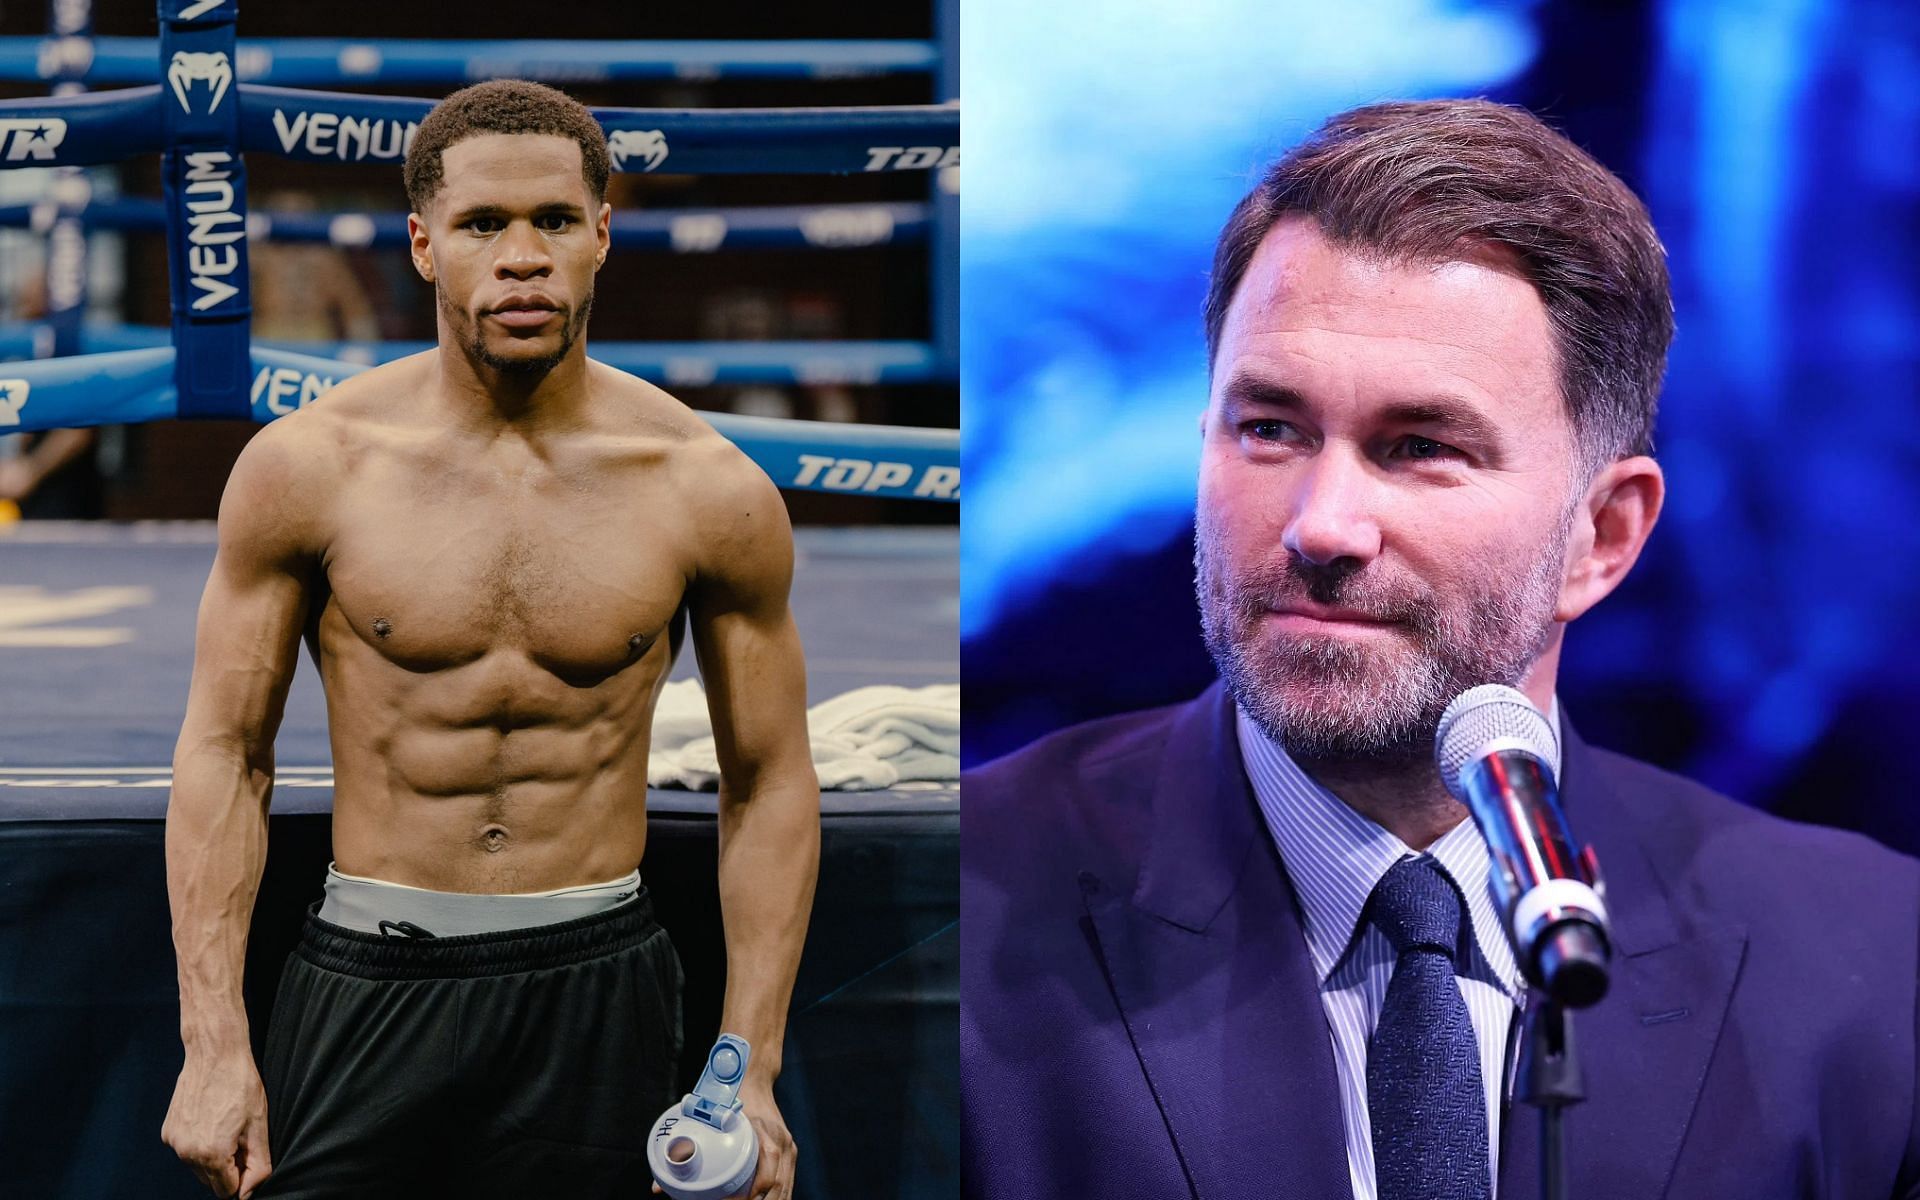 Eddie Hearn (right) fires back at Devin Haney (left) for criticizing Matchroom Boxing [Images courtesy: Getty Images and @realdevinhaney on X]